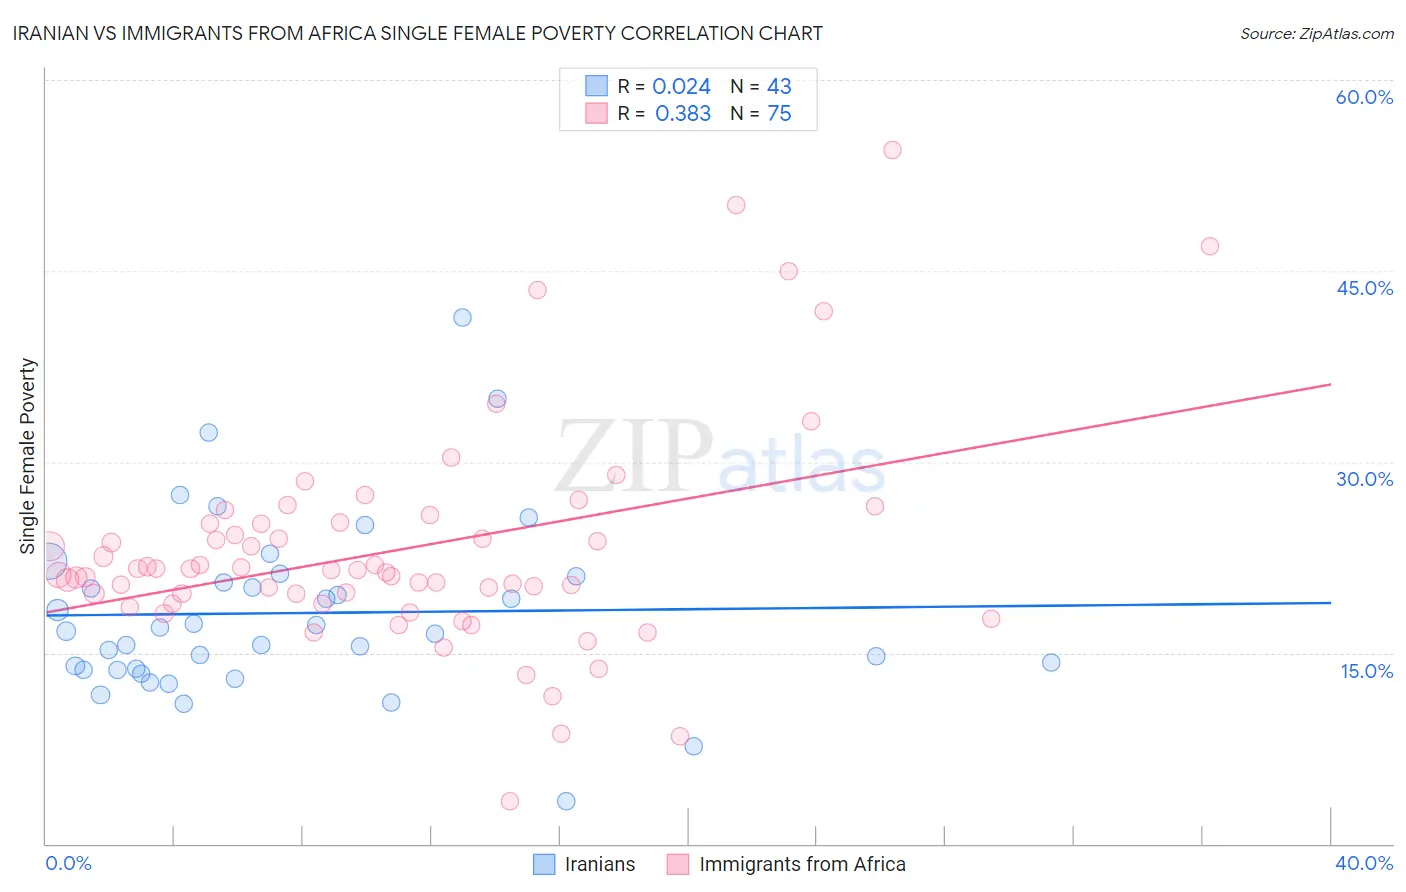 Iranian vs Immigrants from Africa Single Female Poverty